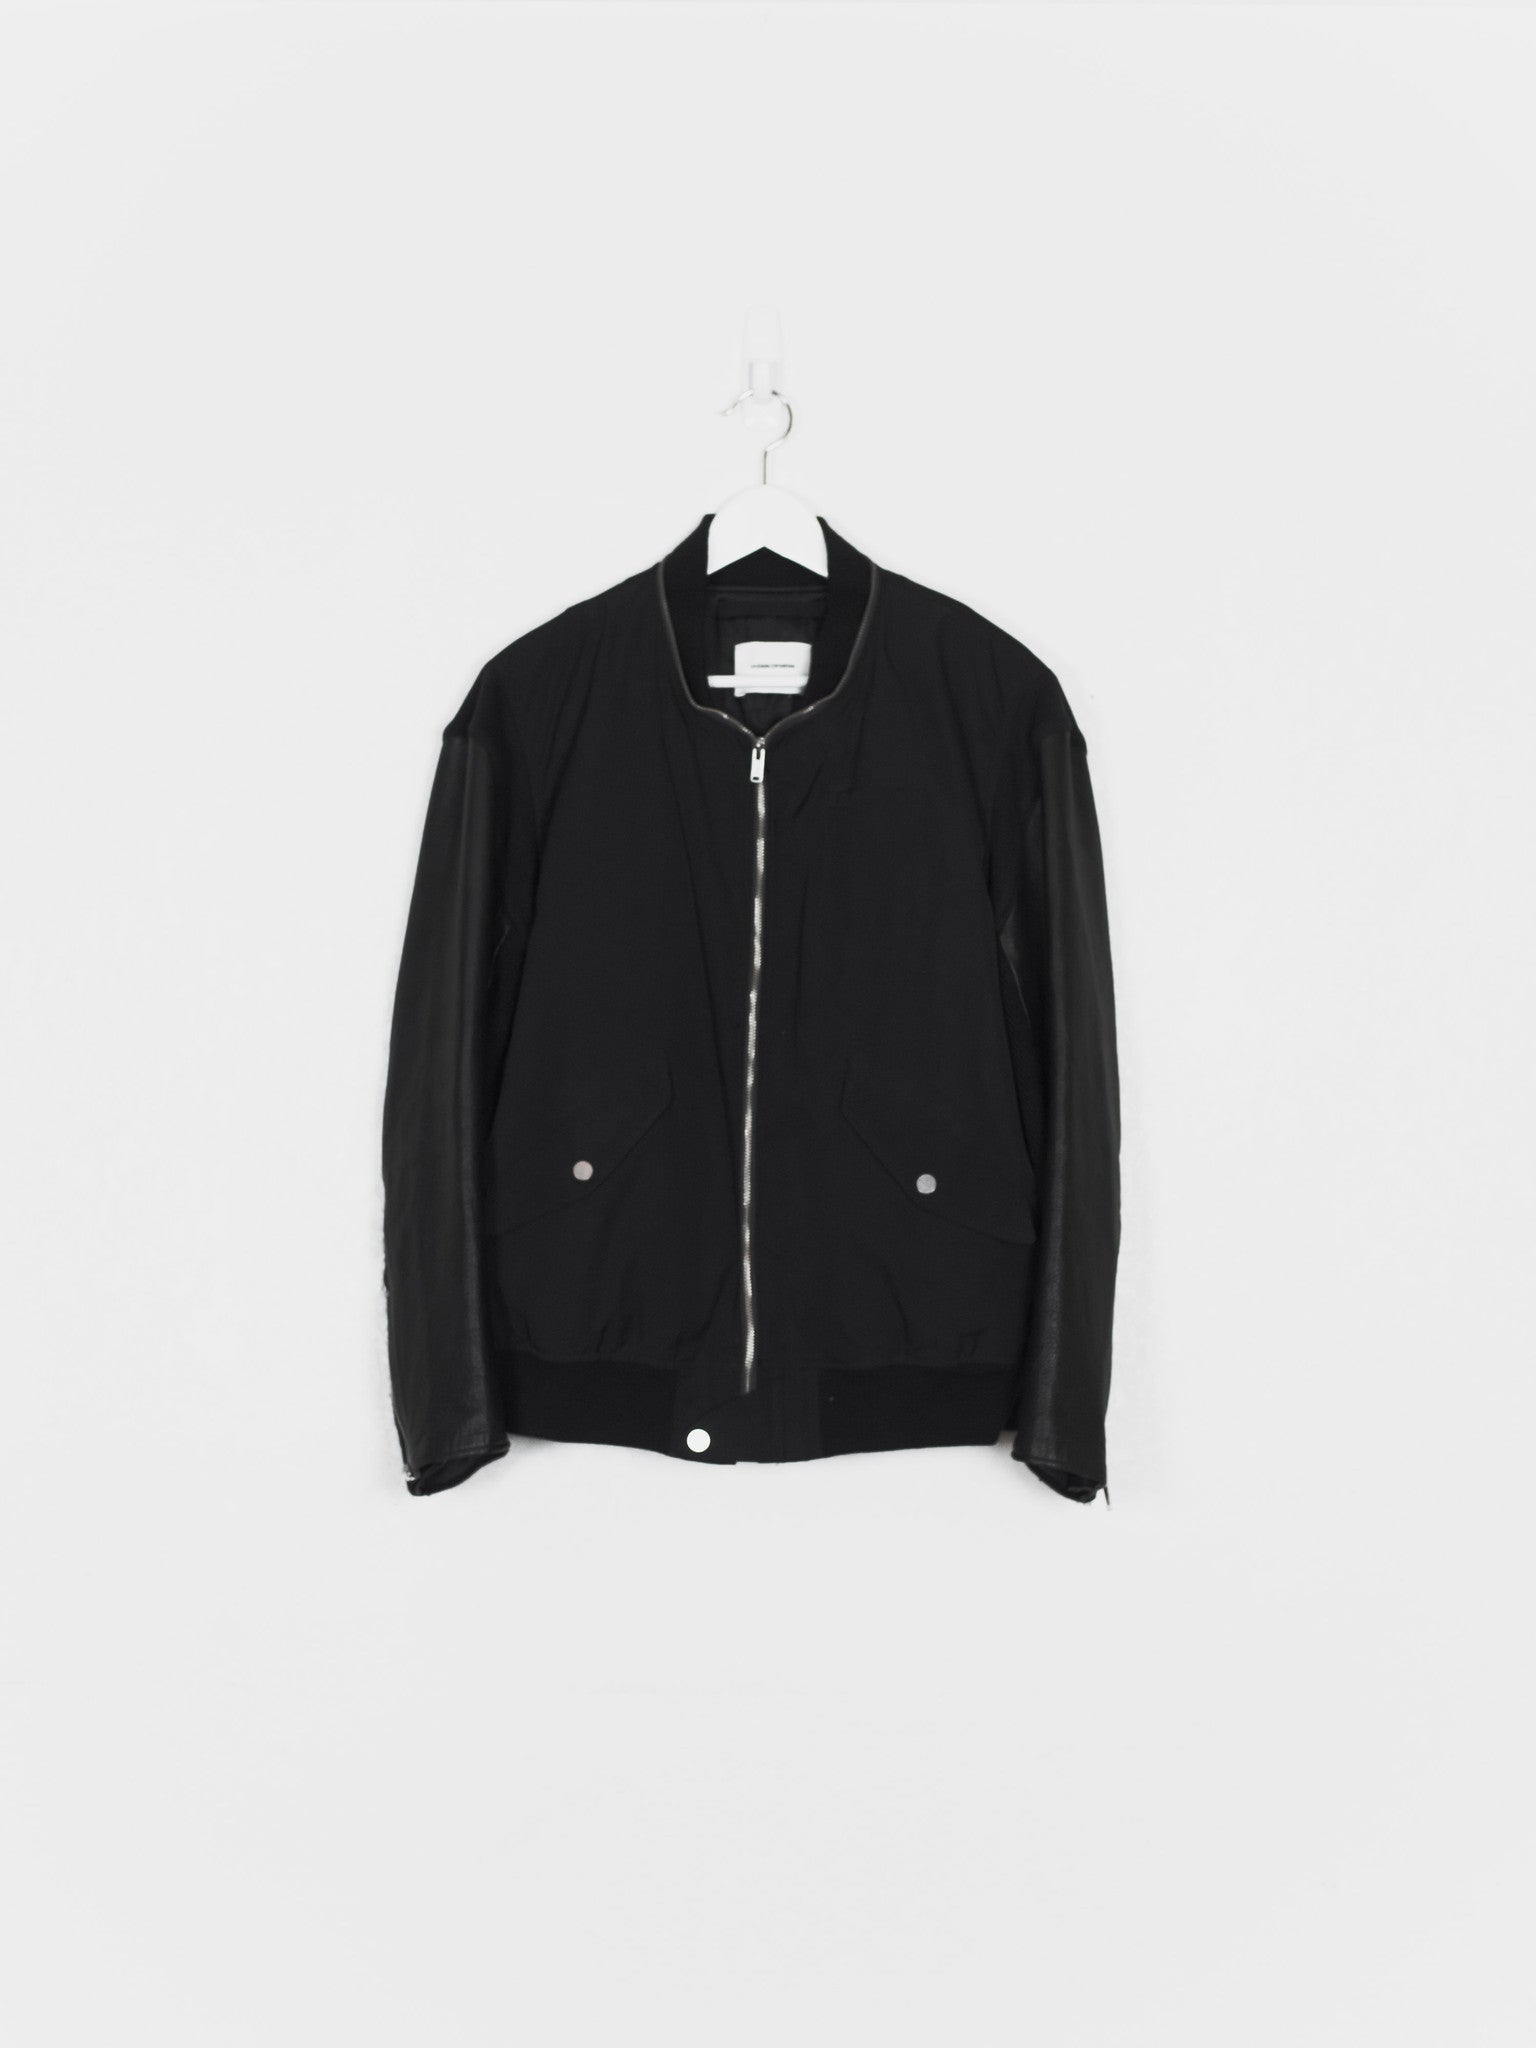 Undercover AW11 Mirror Leather Sleeve Ma-1 Bomber – HUIBEN